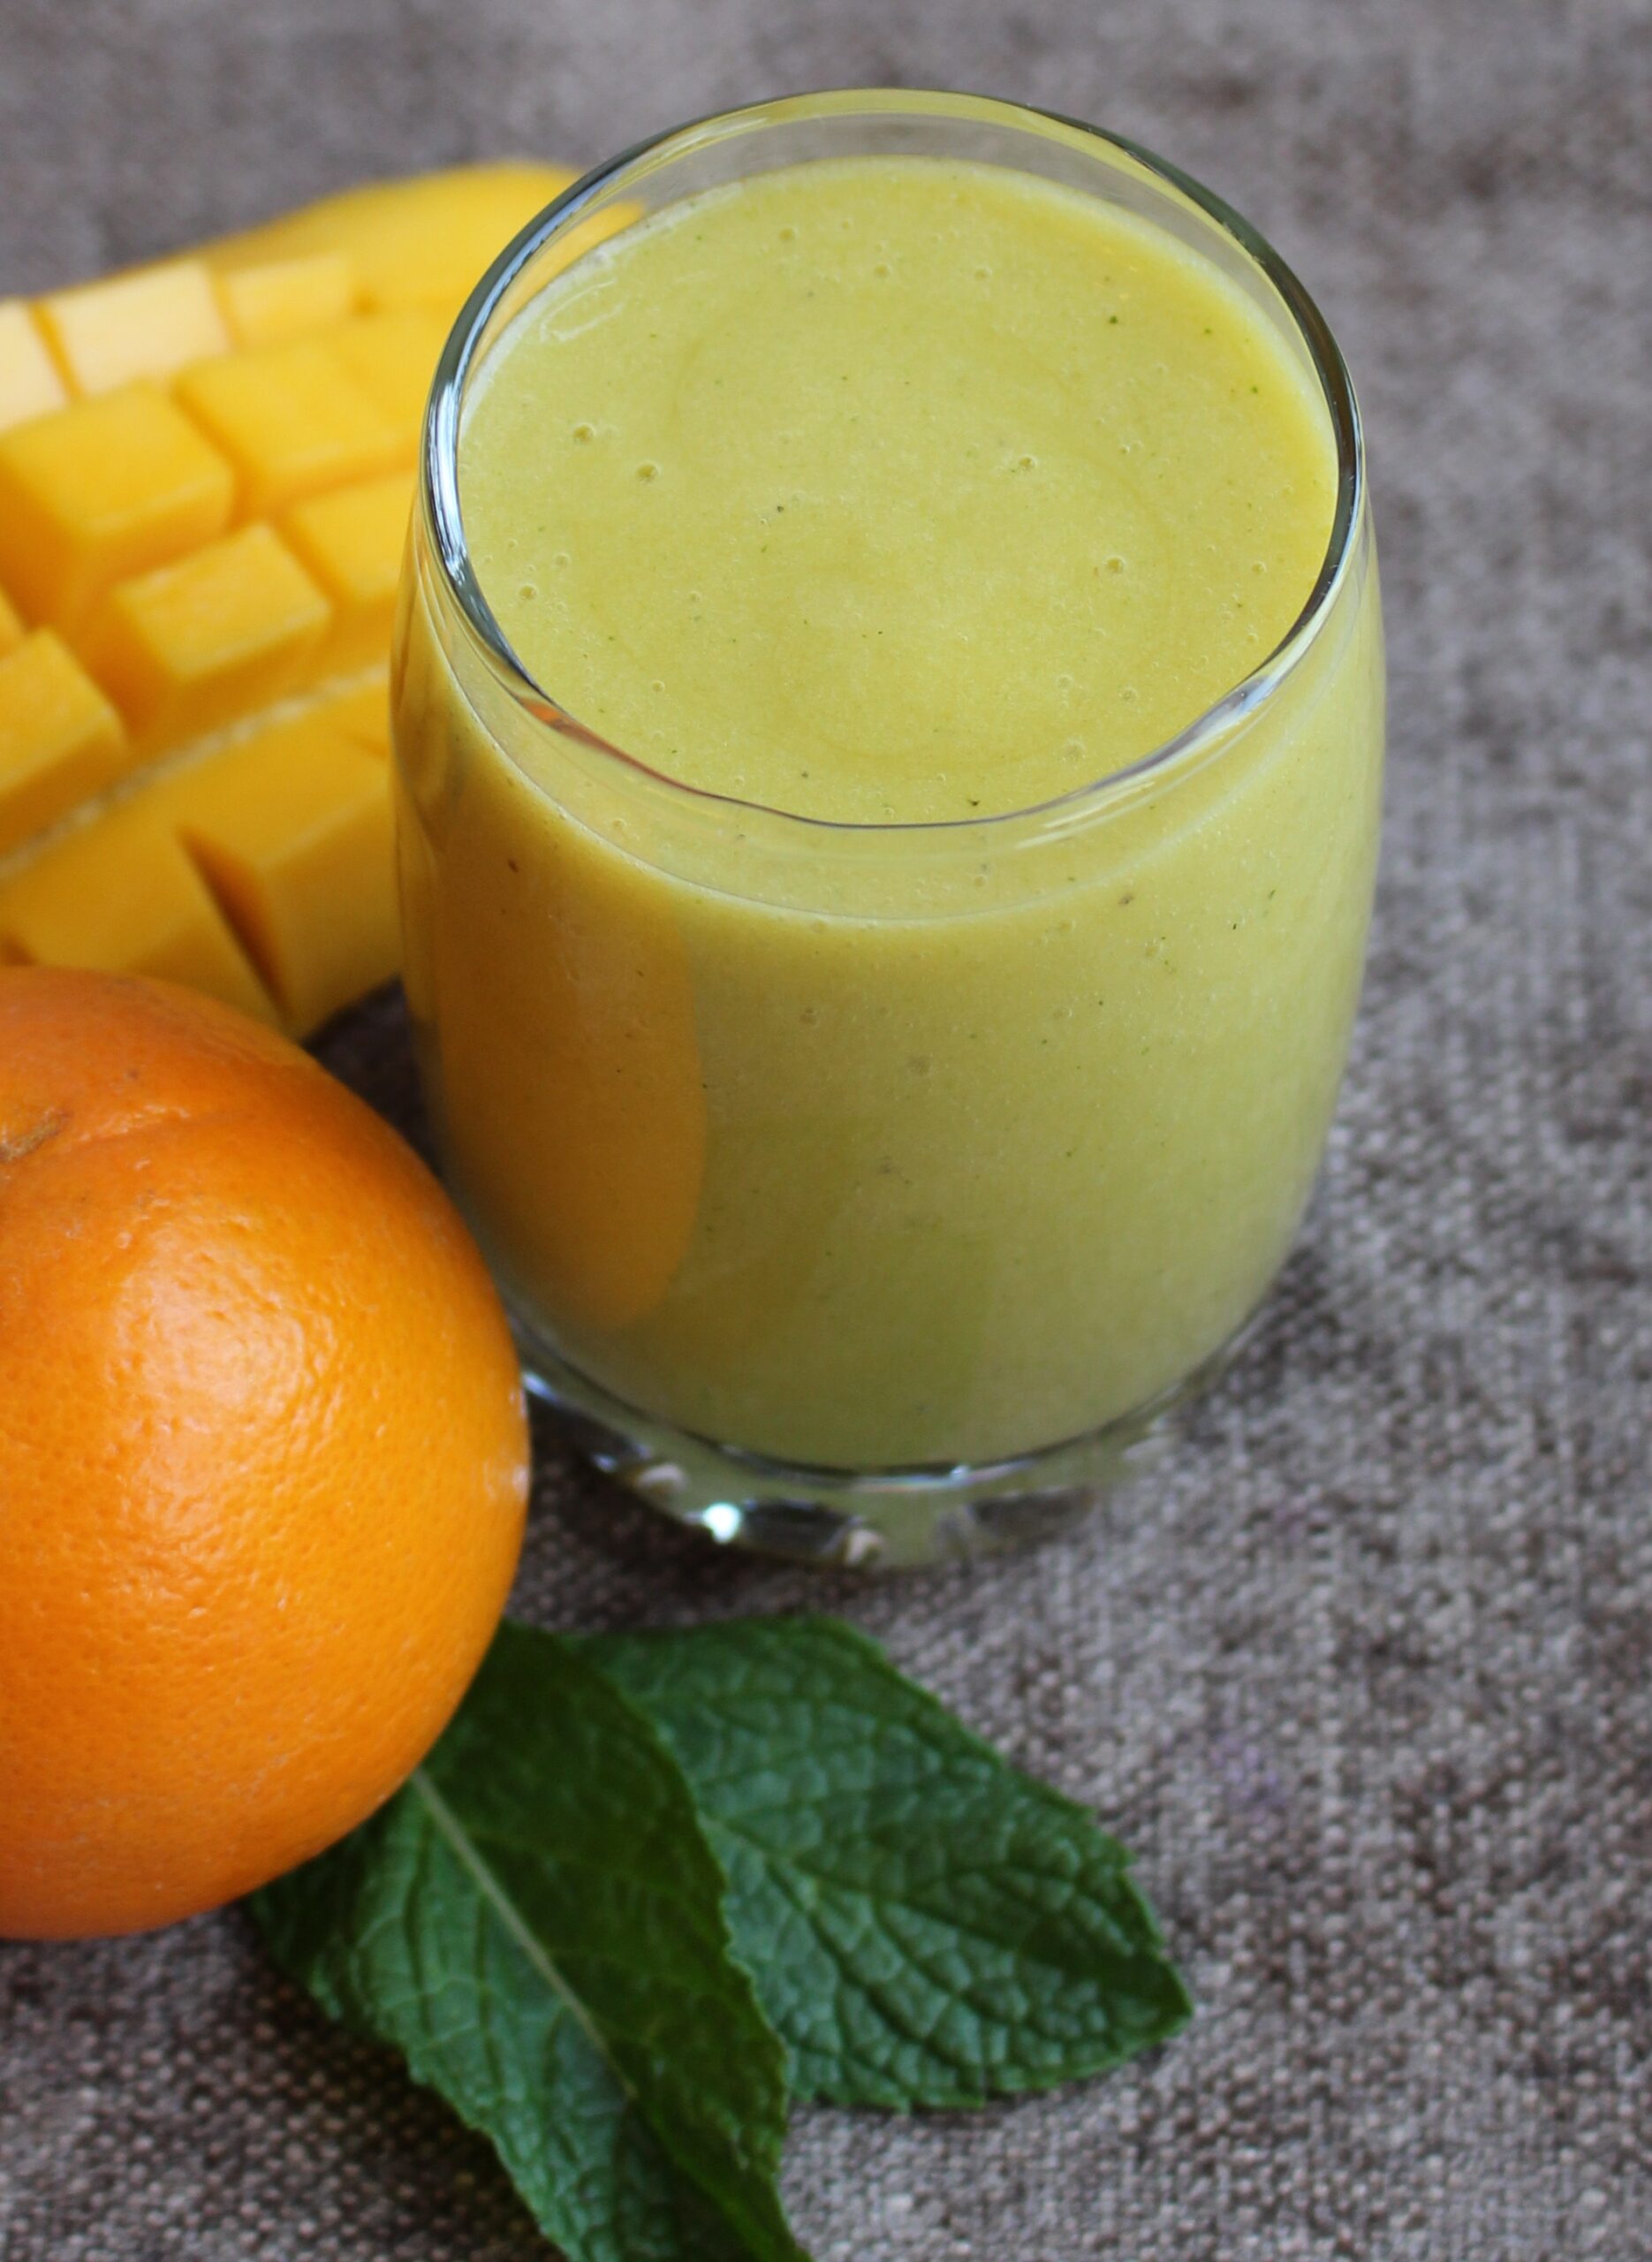 Green smoothie with mango and clementine